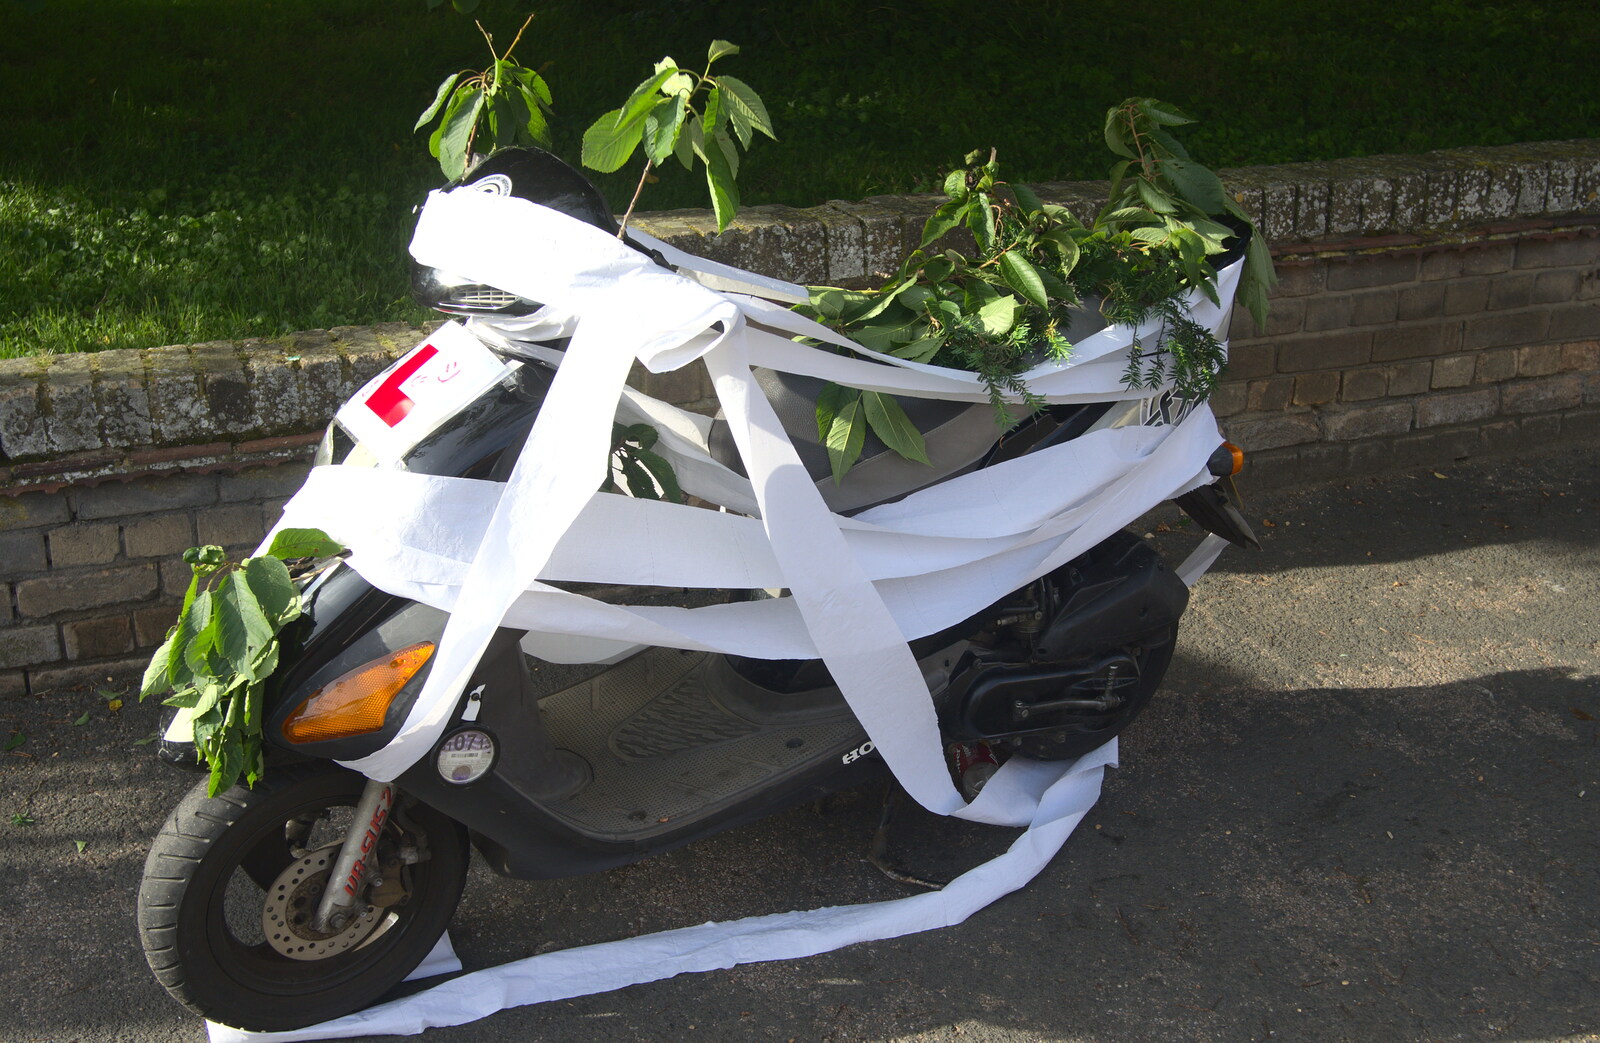 A moped decorated for passing a riding test from The RSPB Charity Bike Ride, Little Glemham, Suffolk - 5th August 2012